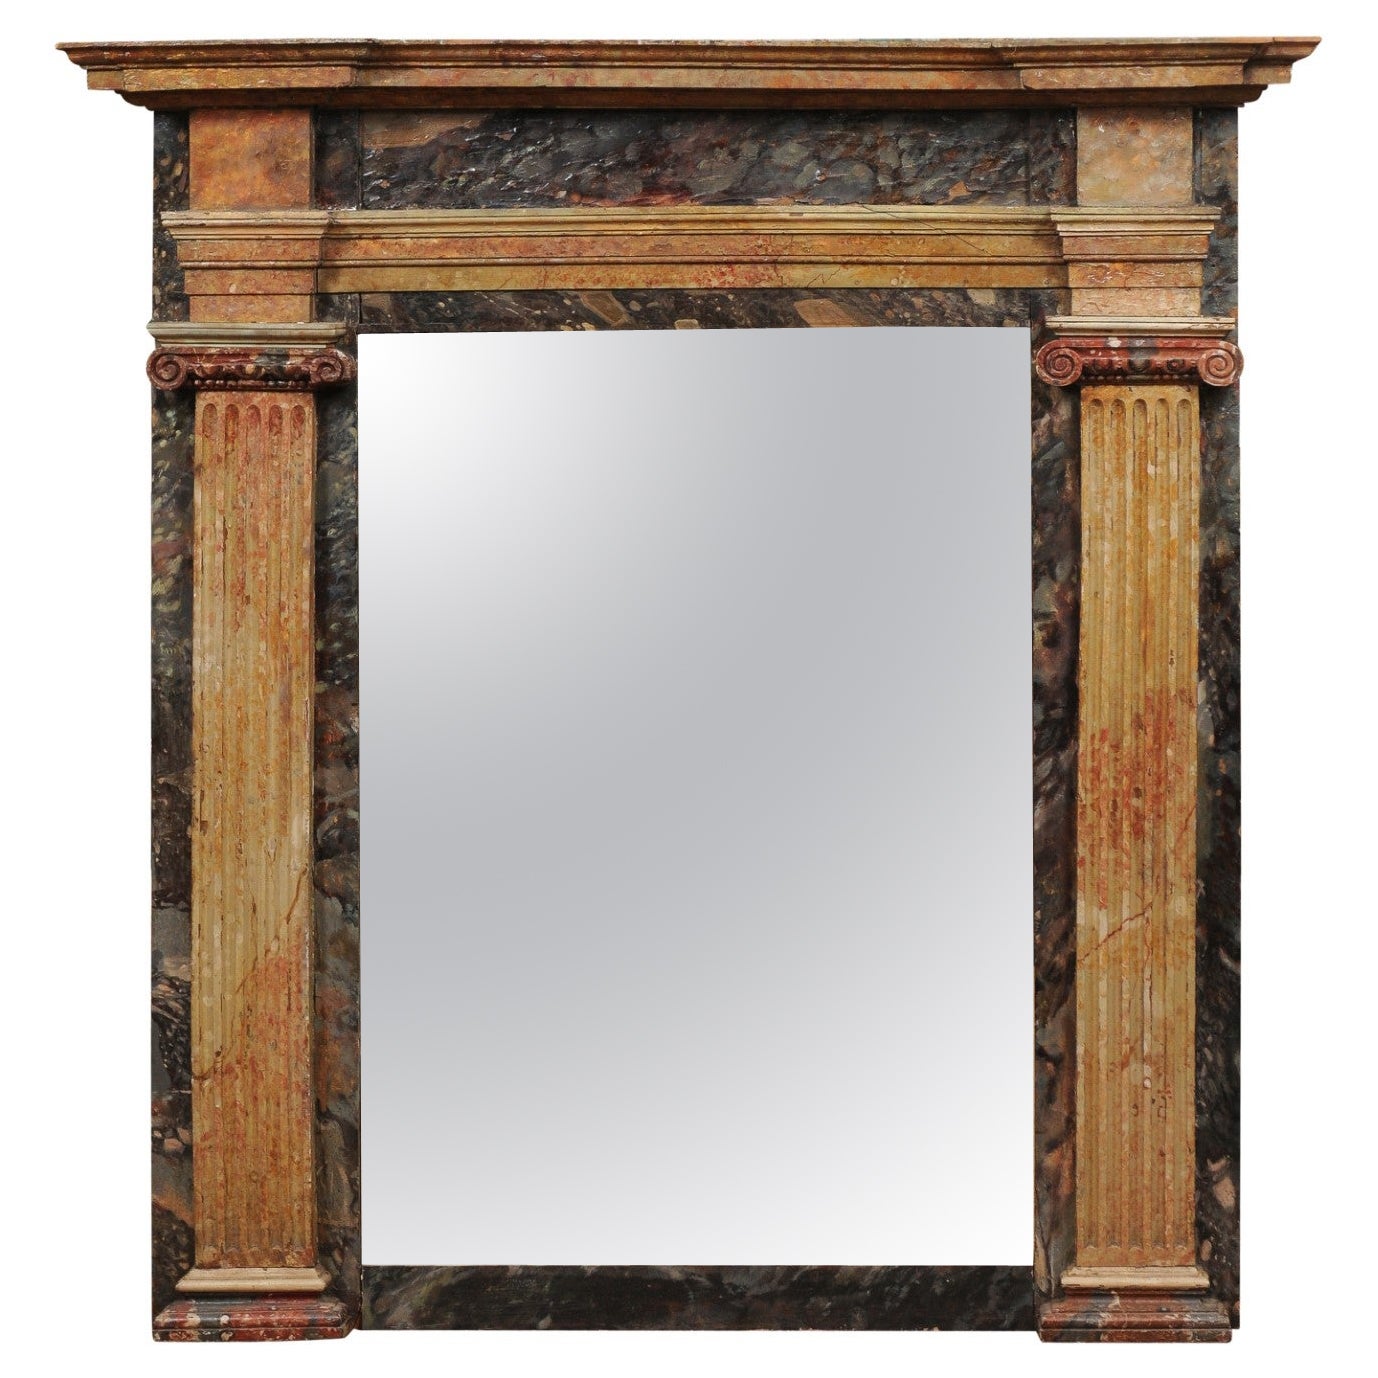 19th Century Italian Painted Mirror with Faux Marbleized Finish & Column Detail For Sale